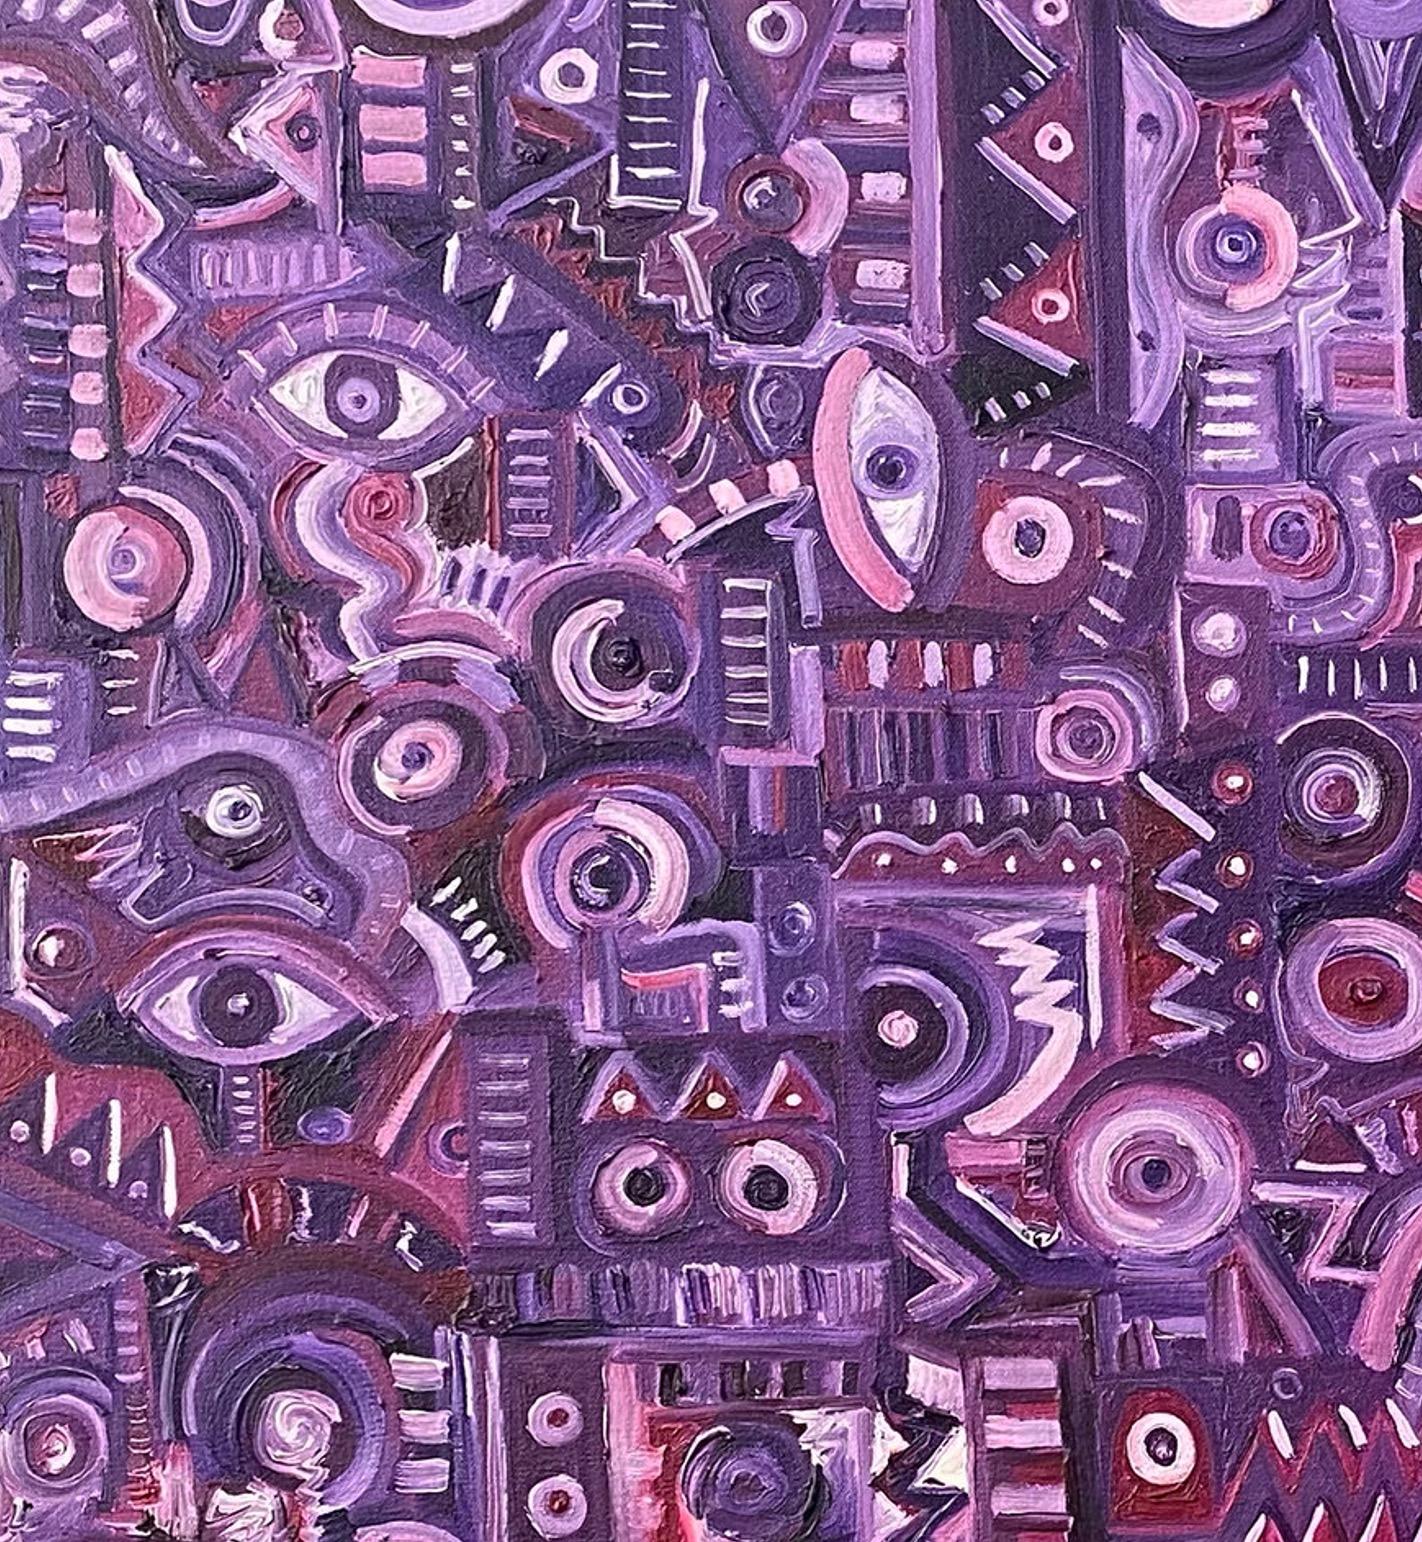 Mixed on canvas
80x110cm
Contemporary Art
Signed and dated

About the artist
Cuauhtemoc´s work is the meeting point of the inevitable and the immovable, mixing senses and invoking the myth of chaos and pleasure. His work lacks norms, carving faces